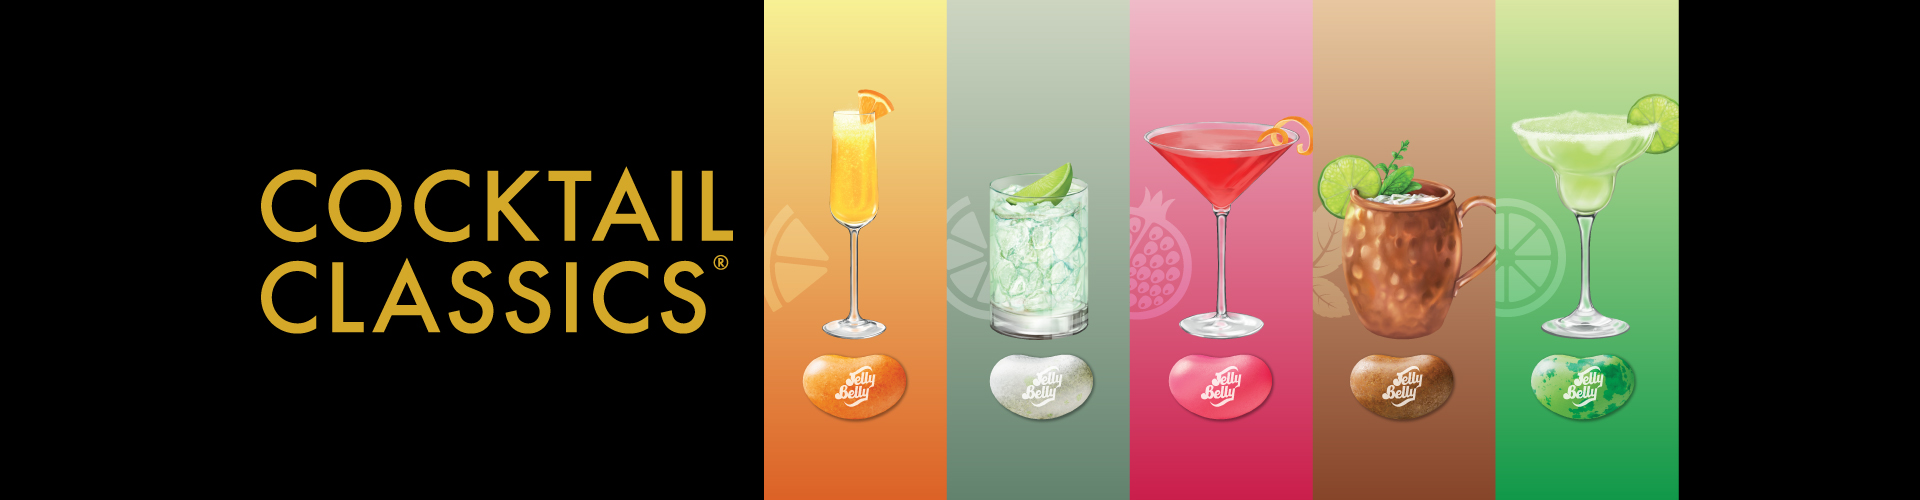 cocktail classics banner showing product image